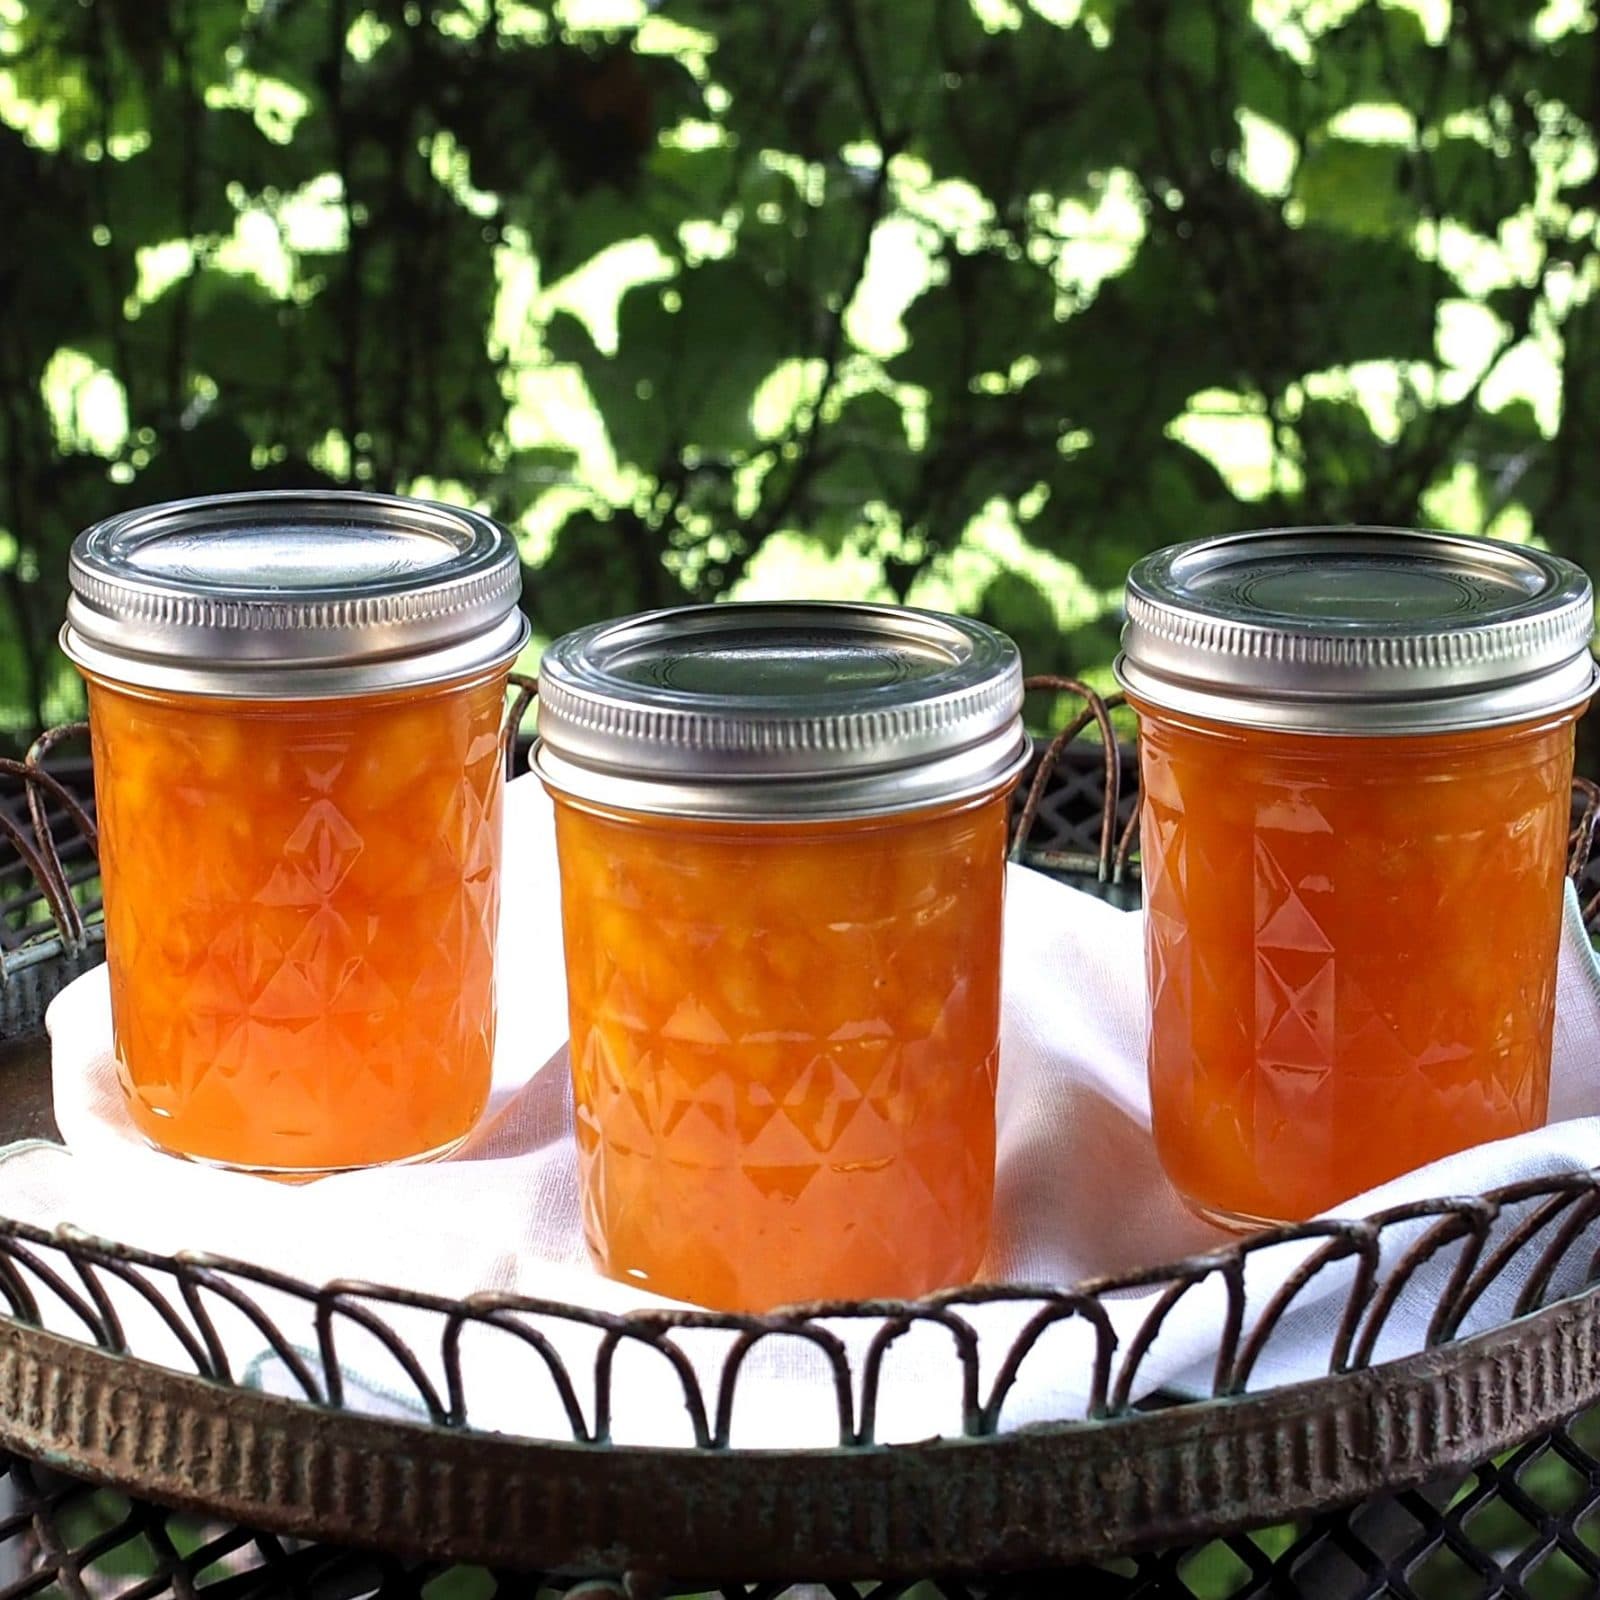 Fresh Peach Jam - this classic jam is bursting w/fresh peach flavor. Quadruple the recipe to enjoy the just-picked peach goodness all year. Simply Sated